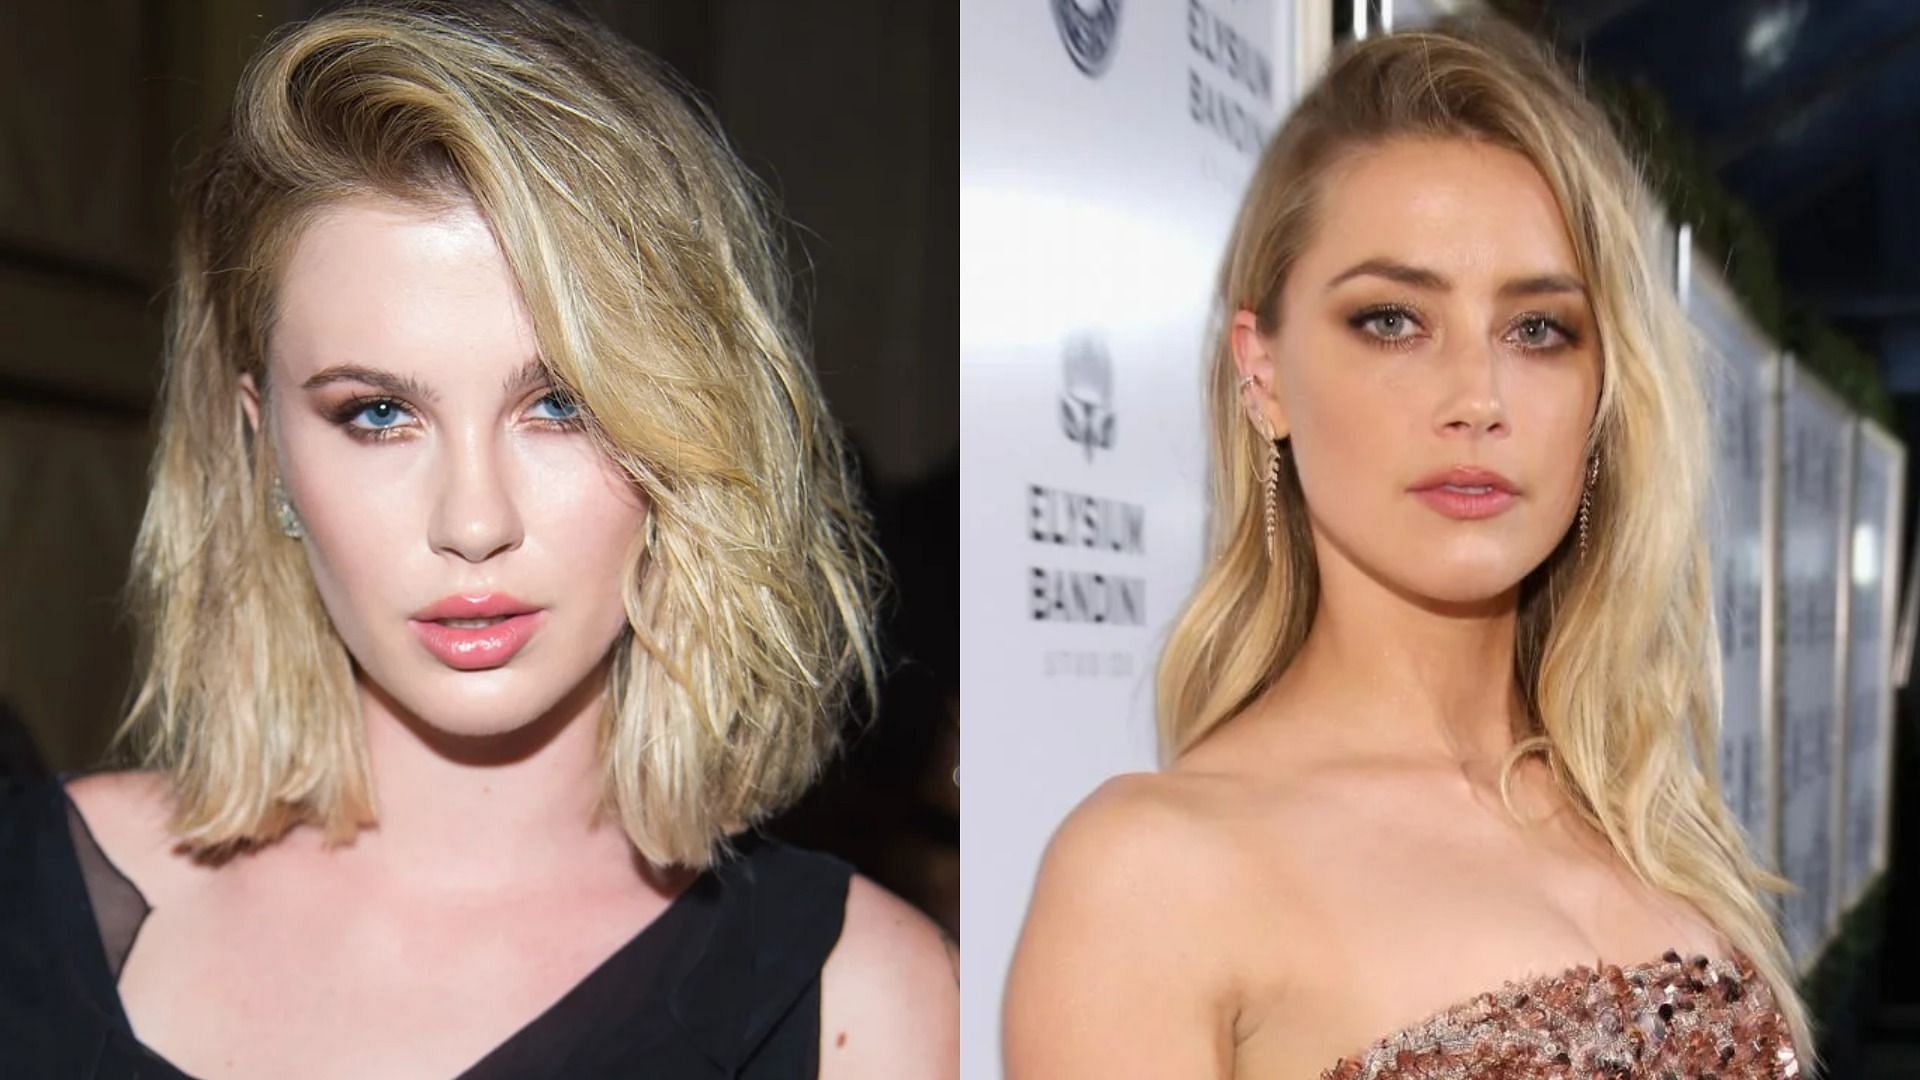 Ireland Baldwin called out Amber Heard, stating that men can experience abuse, too, during the ongoing high-profile Johnny Depp defamation case. (Image via Getty Images/Michael Stewart/Randy Shropshire)